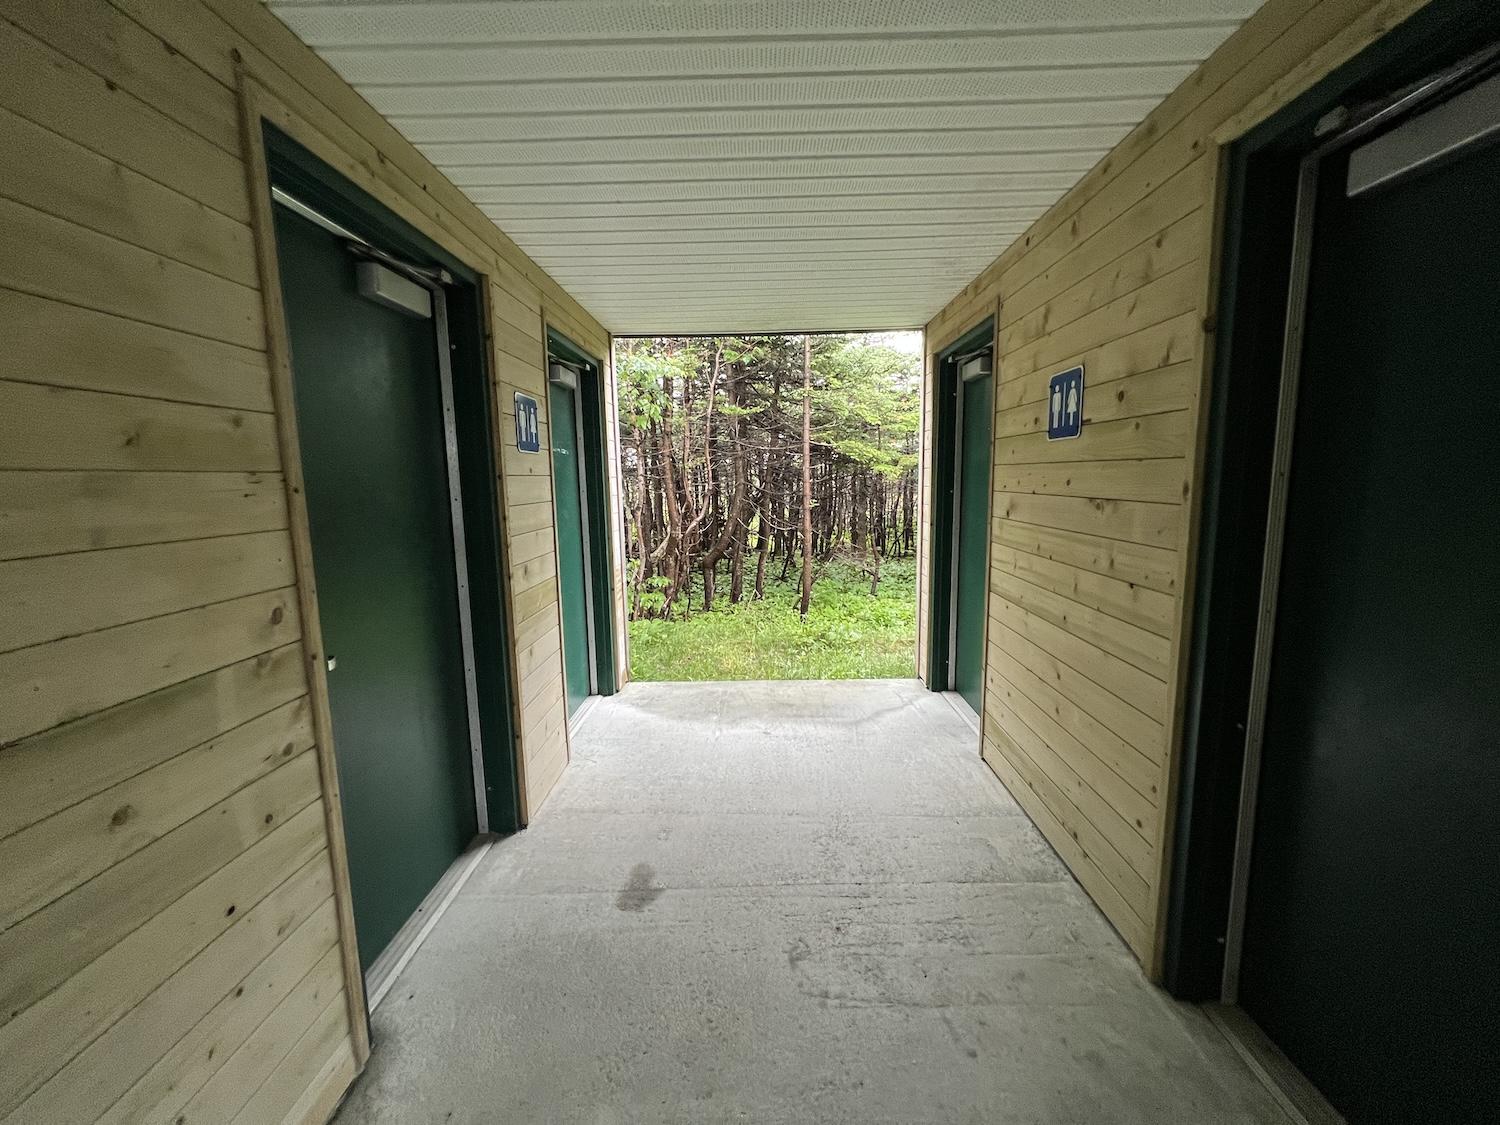 It's a relief to find unisex loos at Gros Morne National Park's Western Brook Pond trailhead.